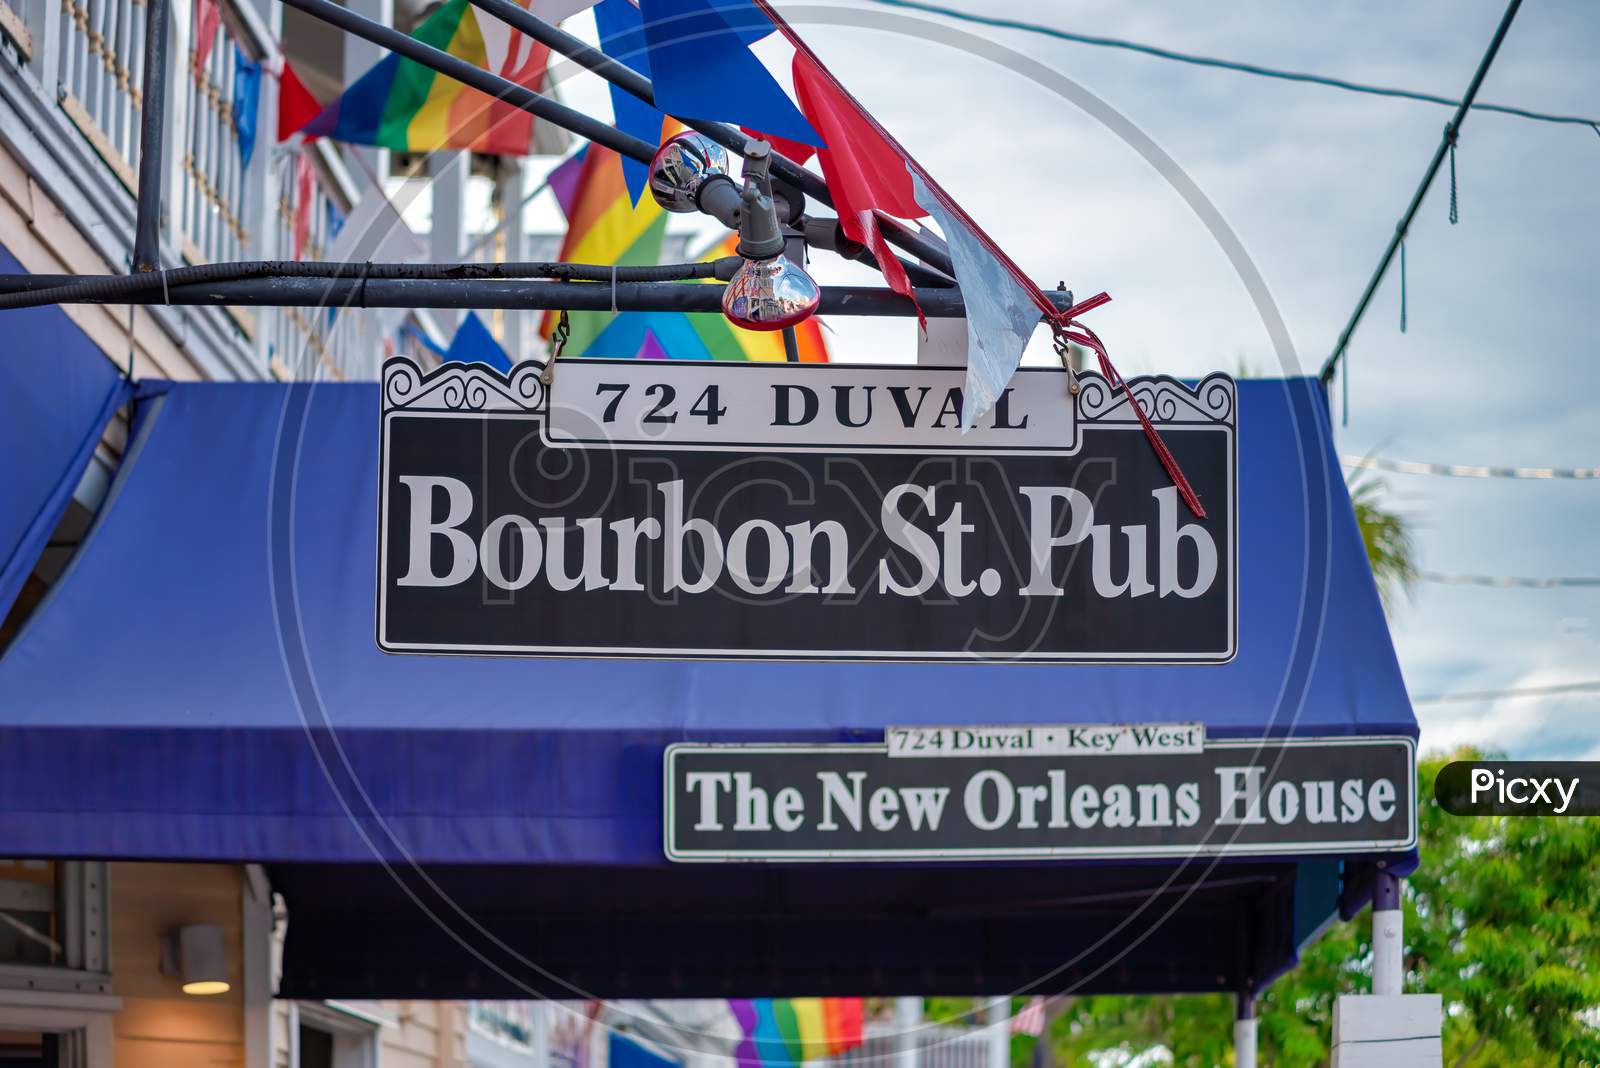 The Bourbon St. Pub On 724 Duval. Editorial use only